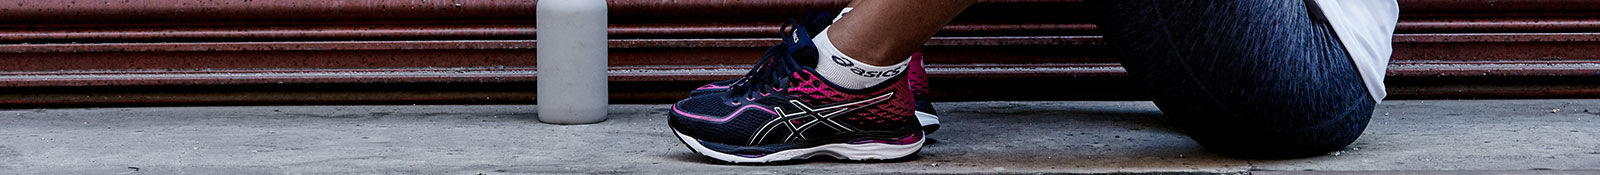 When to Replace Your Running Shoes | ASICS